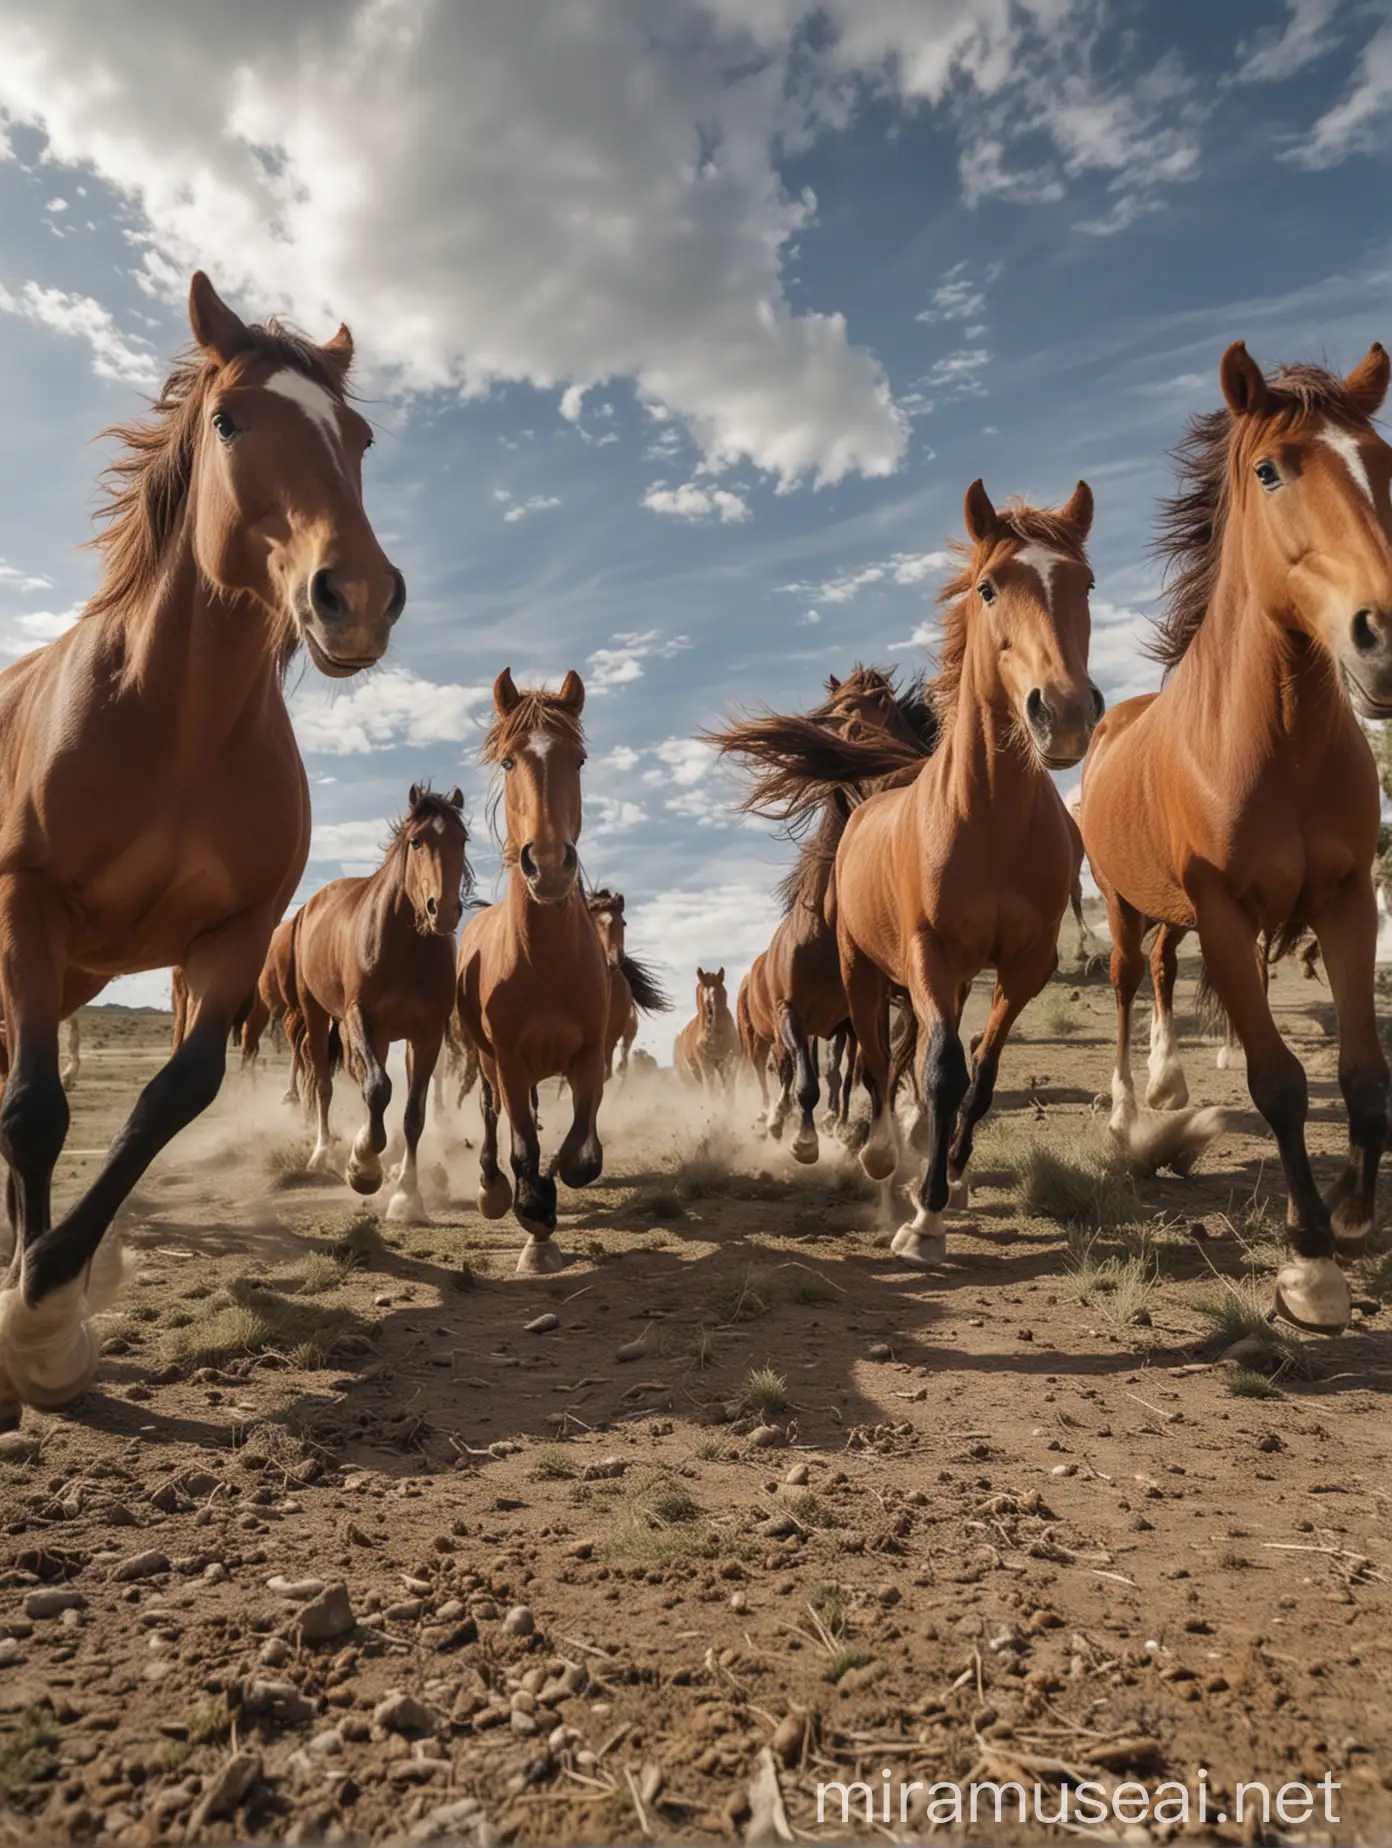  wild horses running toward viewed by wide angle lens, view is close to the ground near the hooves 
